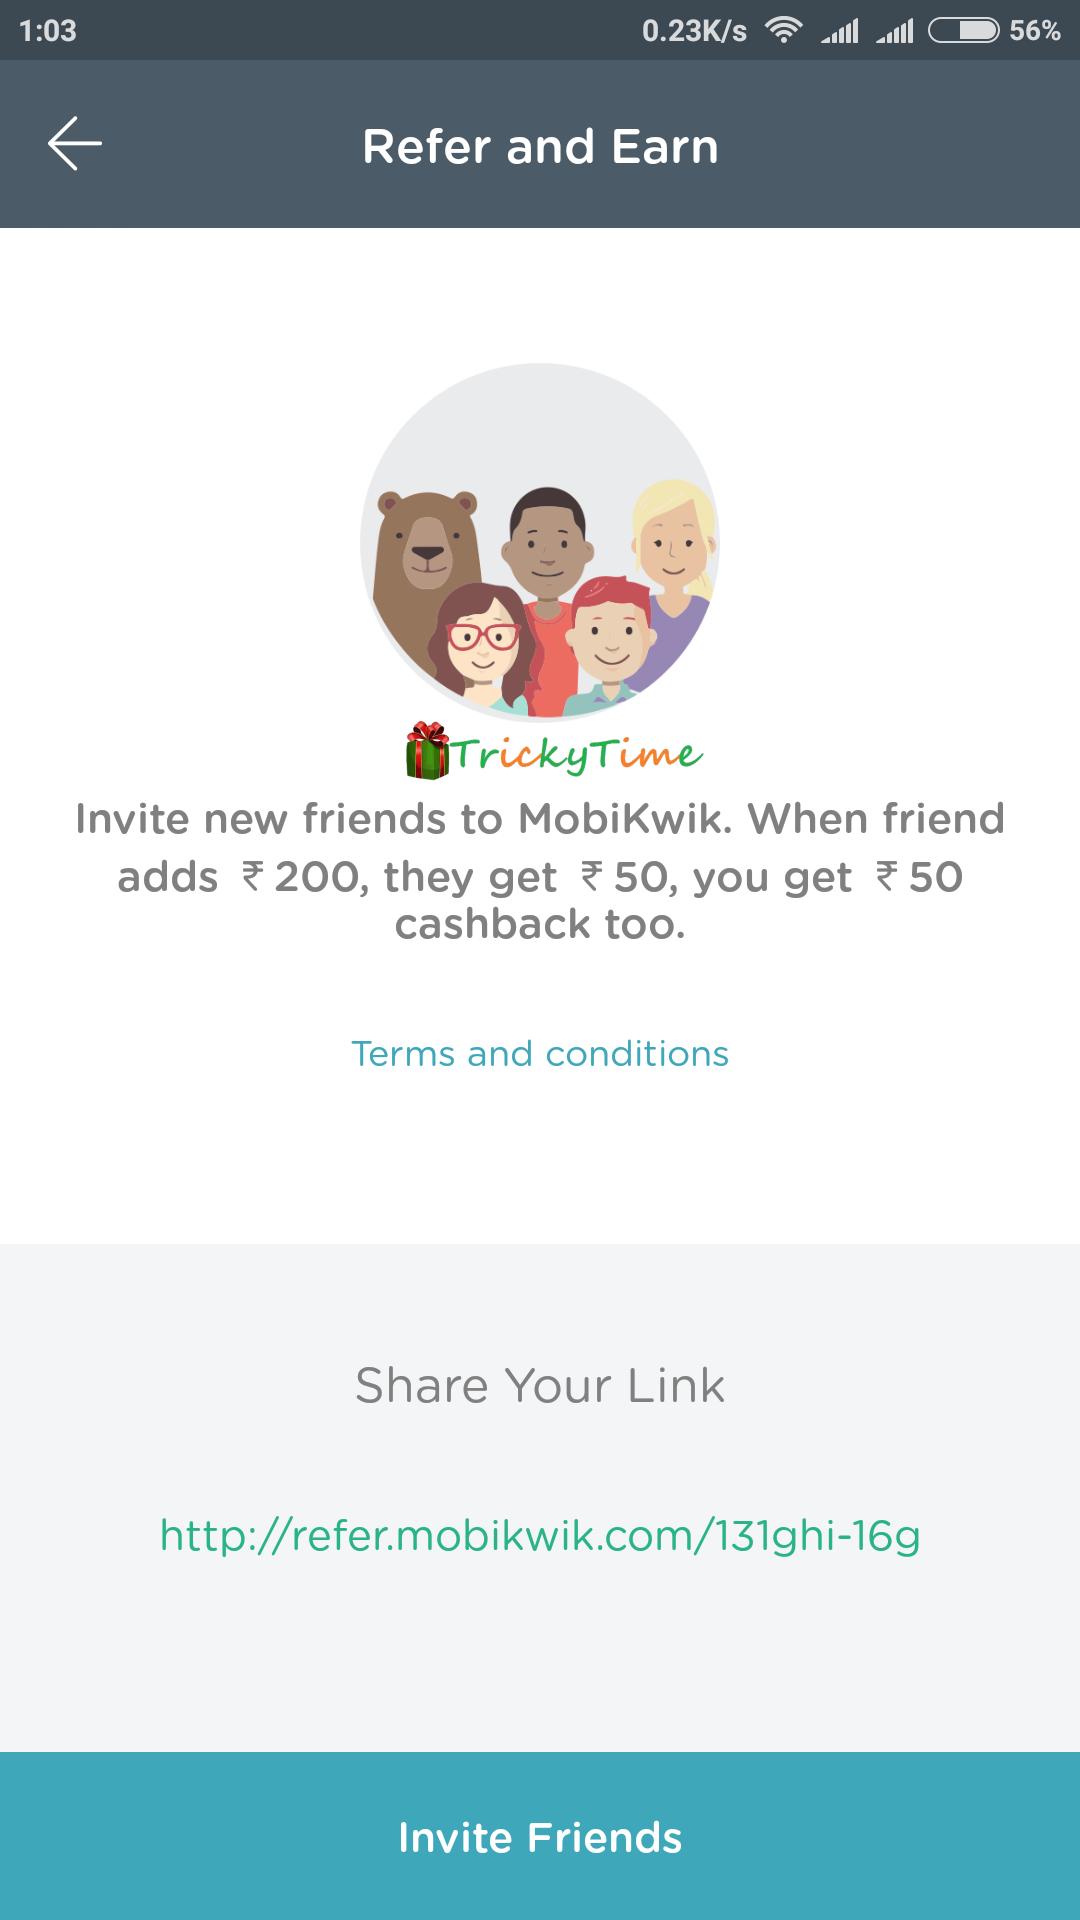 (Update+Proof) Mobikwik Refer and Earn - Signup & Get Rs.50 & Get Rs.50/Refer